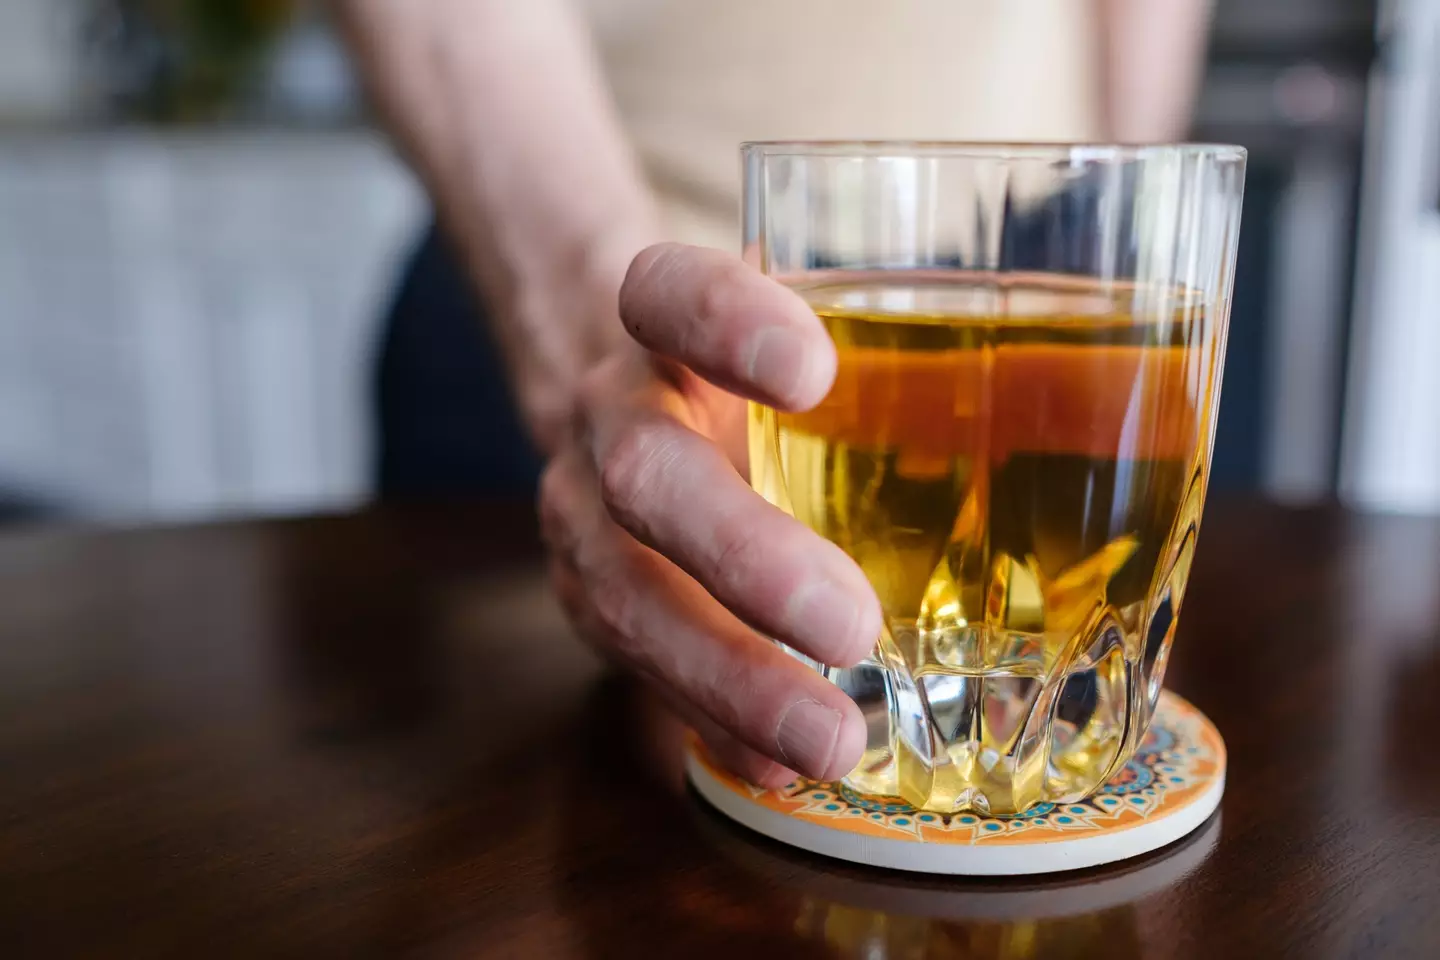 The onset of pain in the lymph nodes is immediate after drinking even the smallest amount of alcohol (Getty Stock Images)